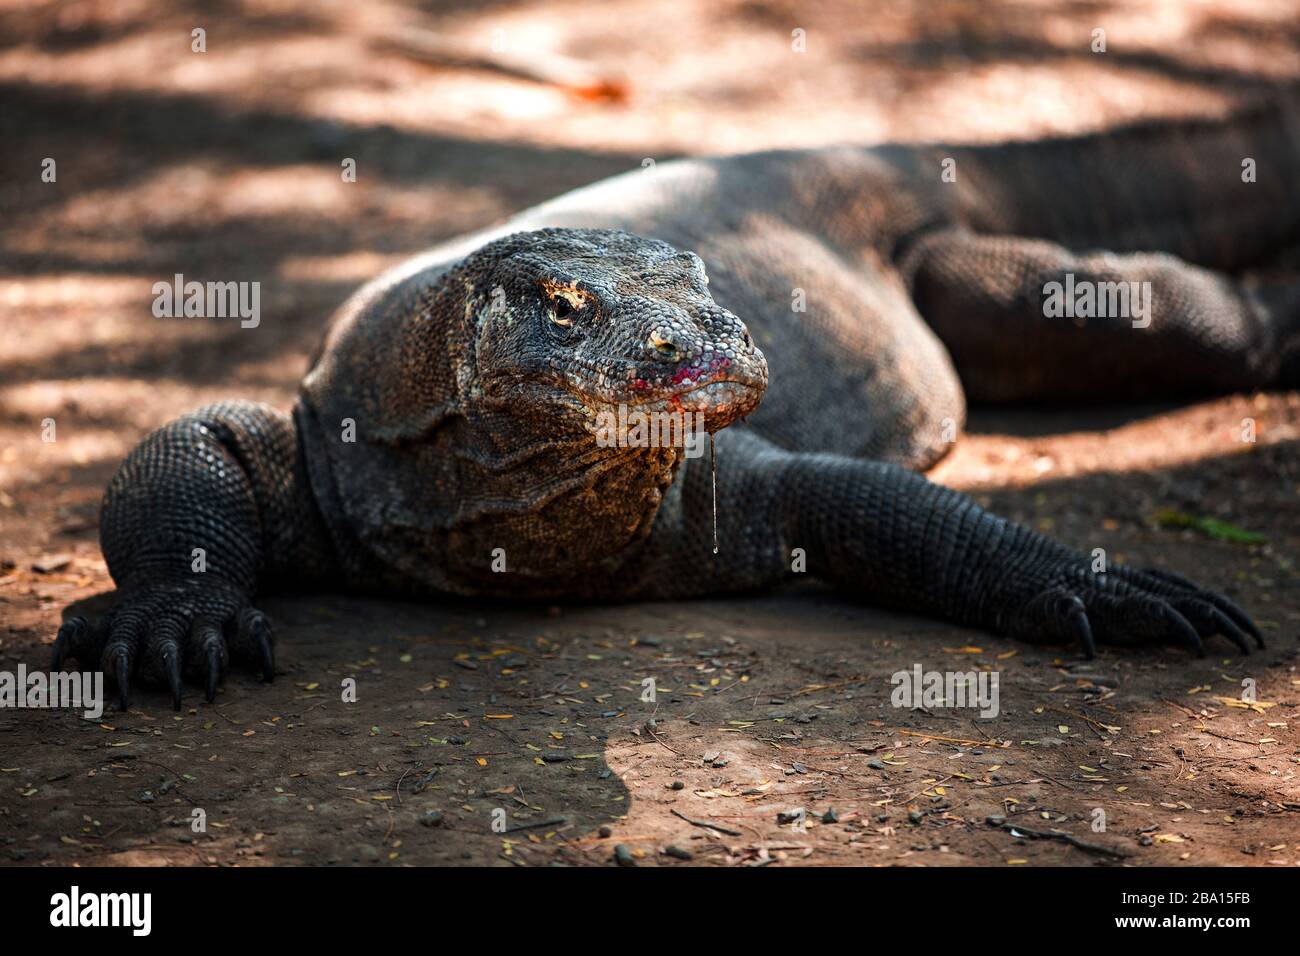 Komodo Dragon Fight High Resolution Stock Photography And Images Alamy